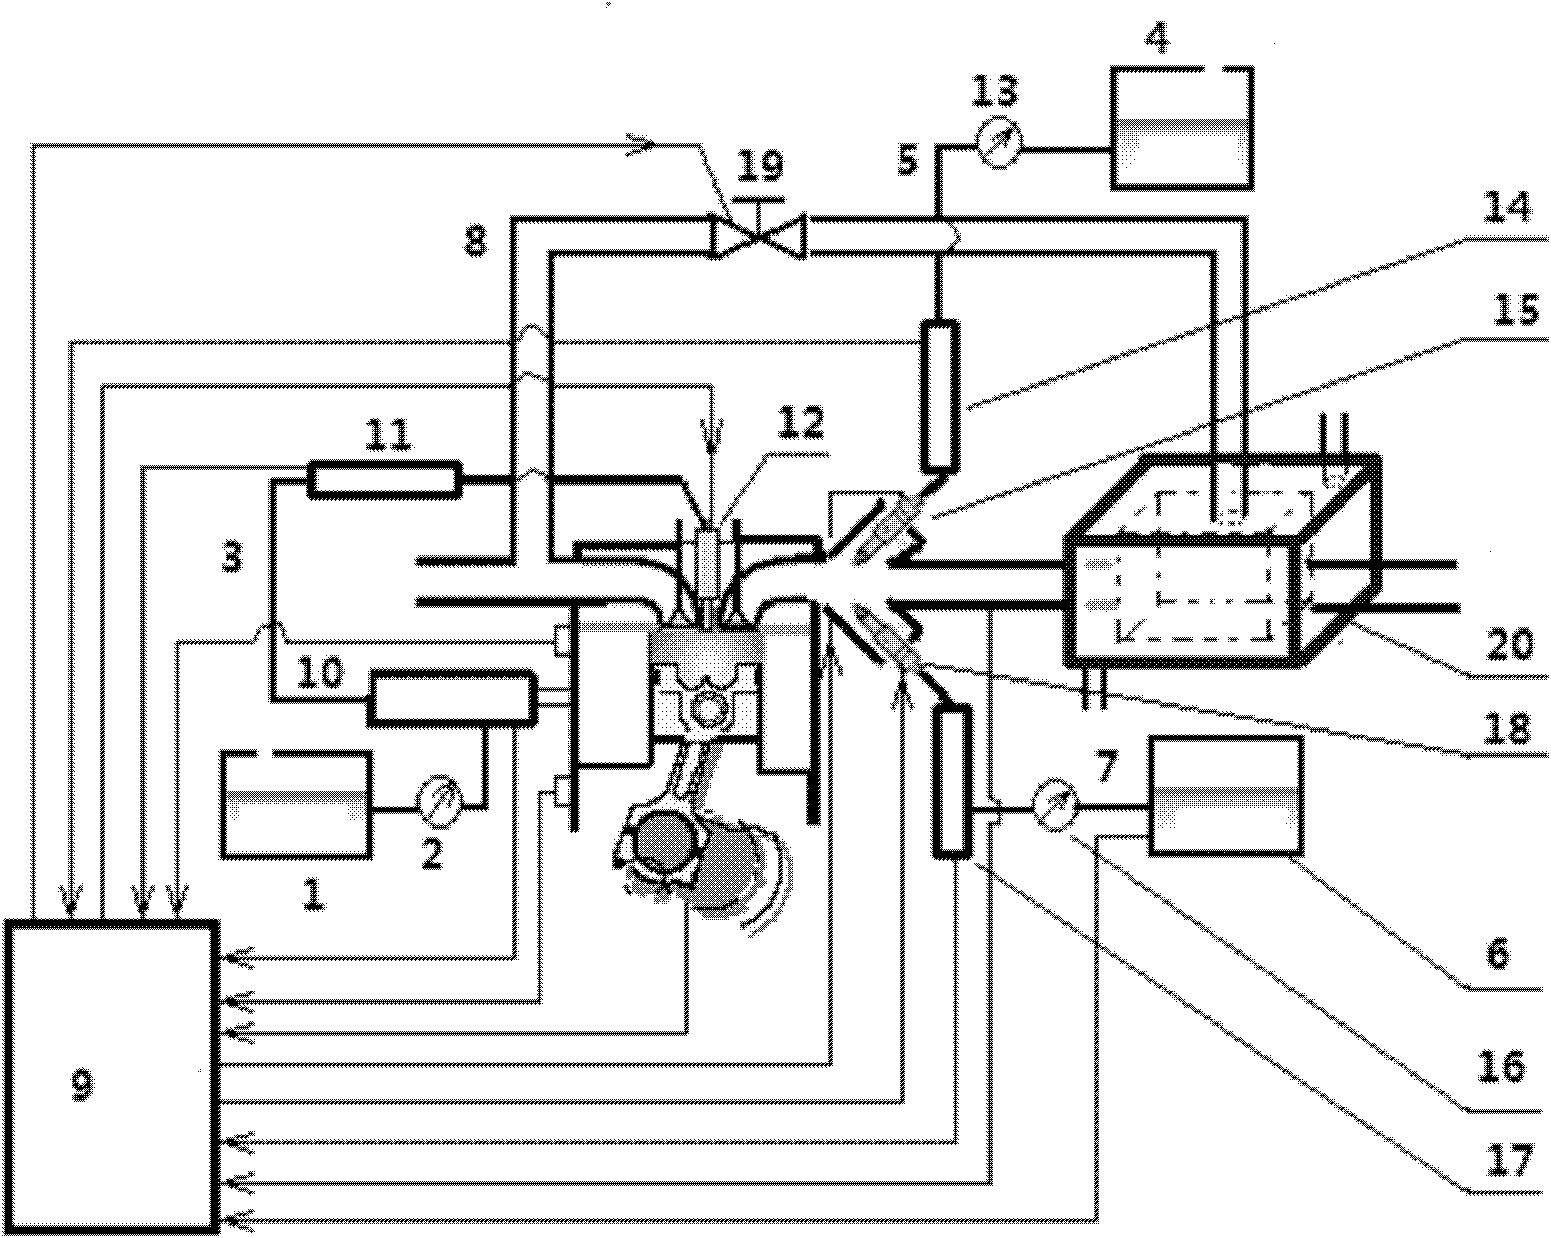 Multi-mode multi-fuel combustion system